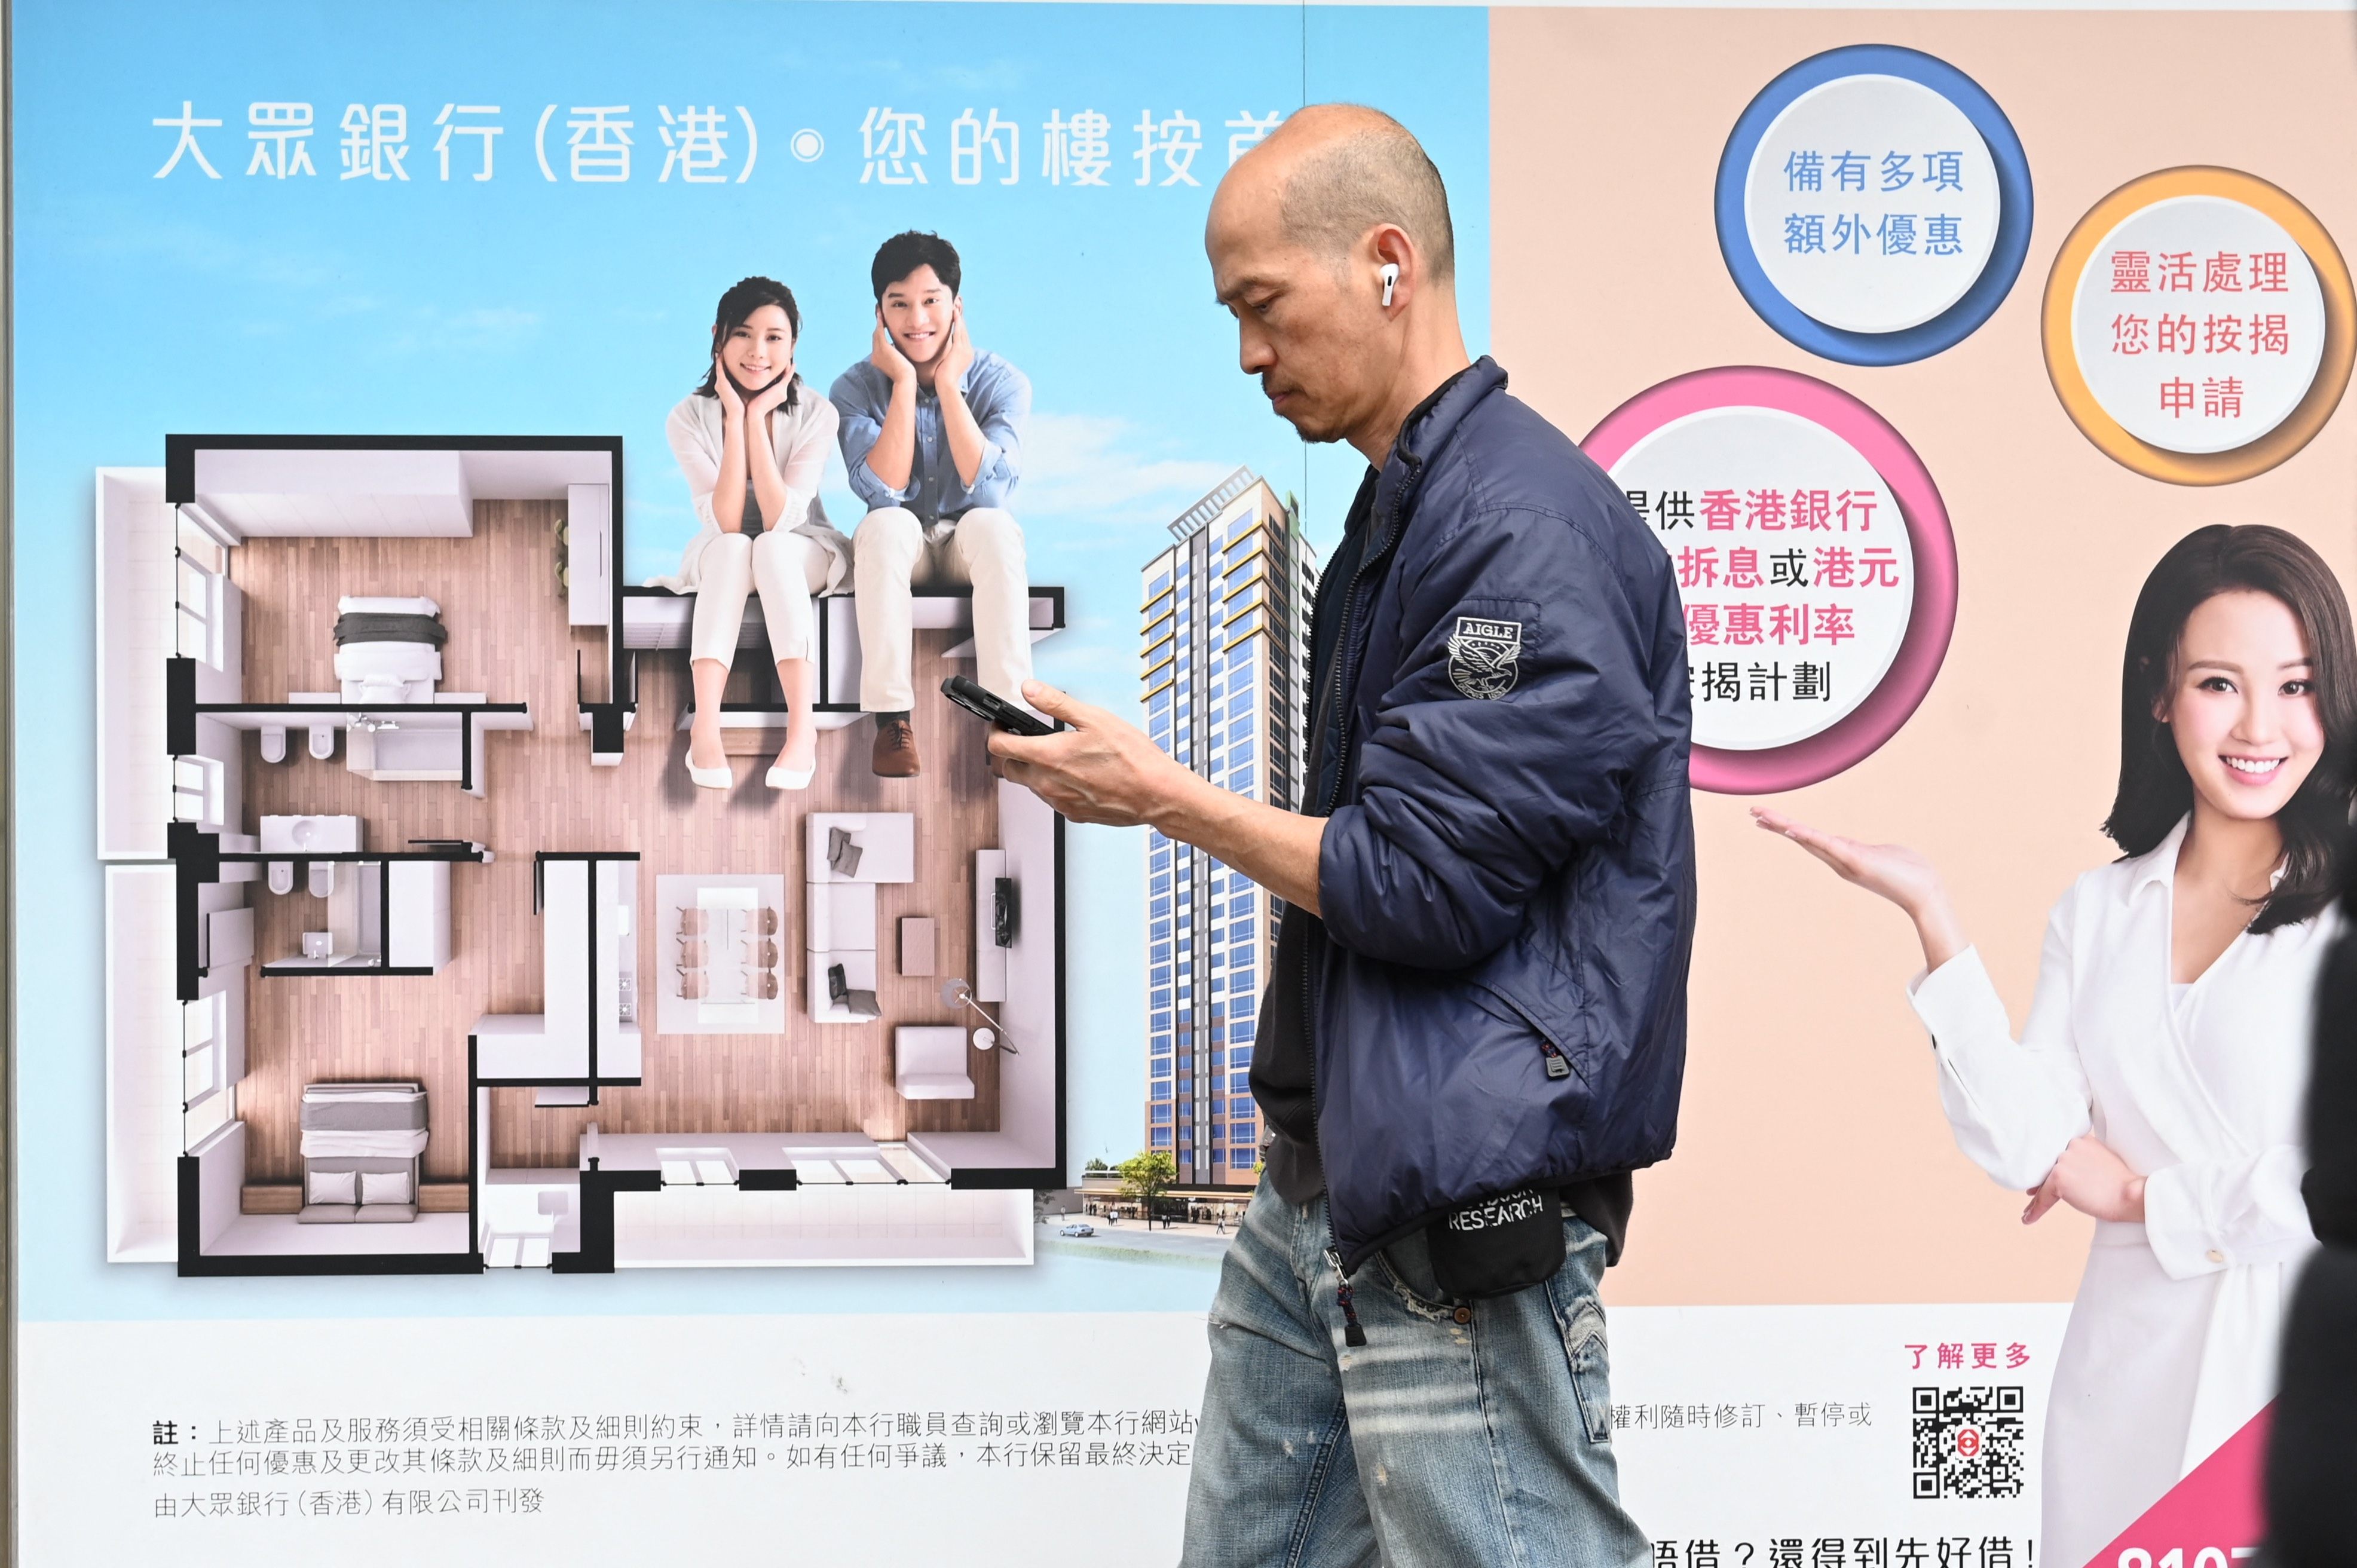 A man uses his photo outside a bank advertising mortgages in Hong Kong on February 28. Hong Kong has dropped all property market curbs in a bid to boost buyer sentiment. Photo: AFP